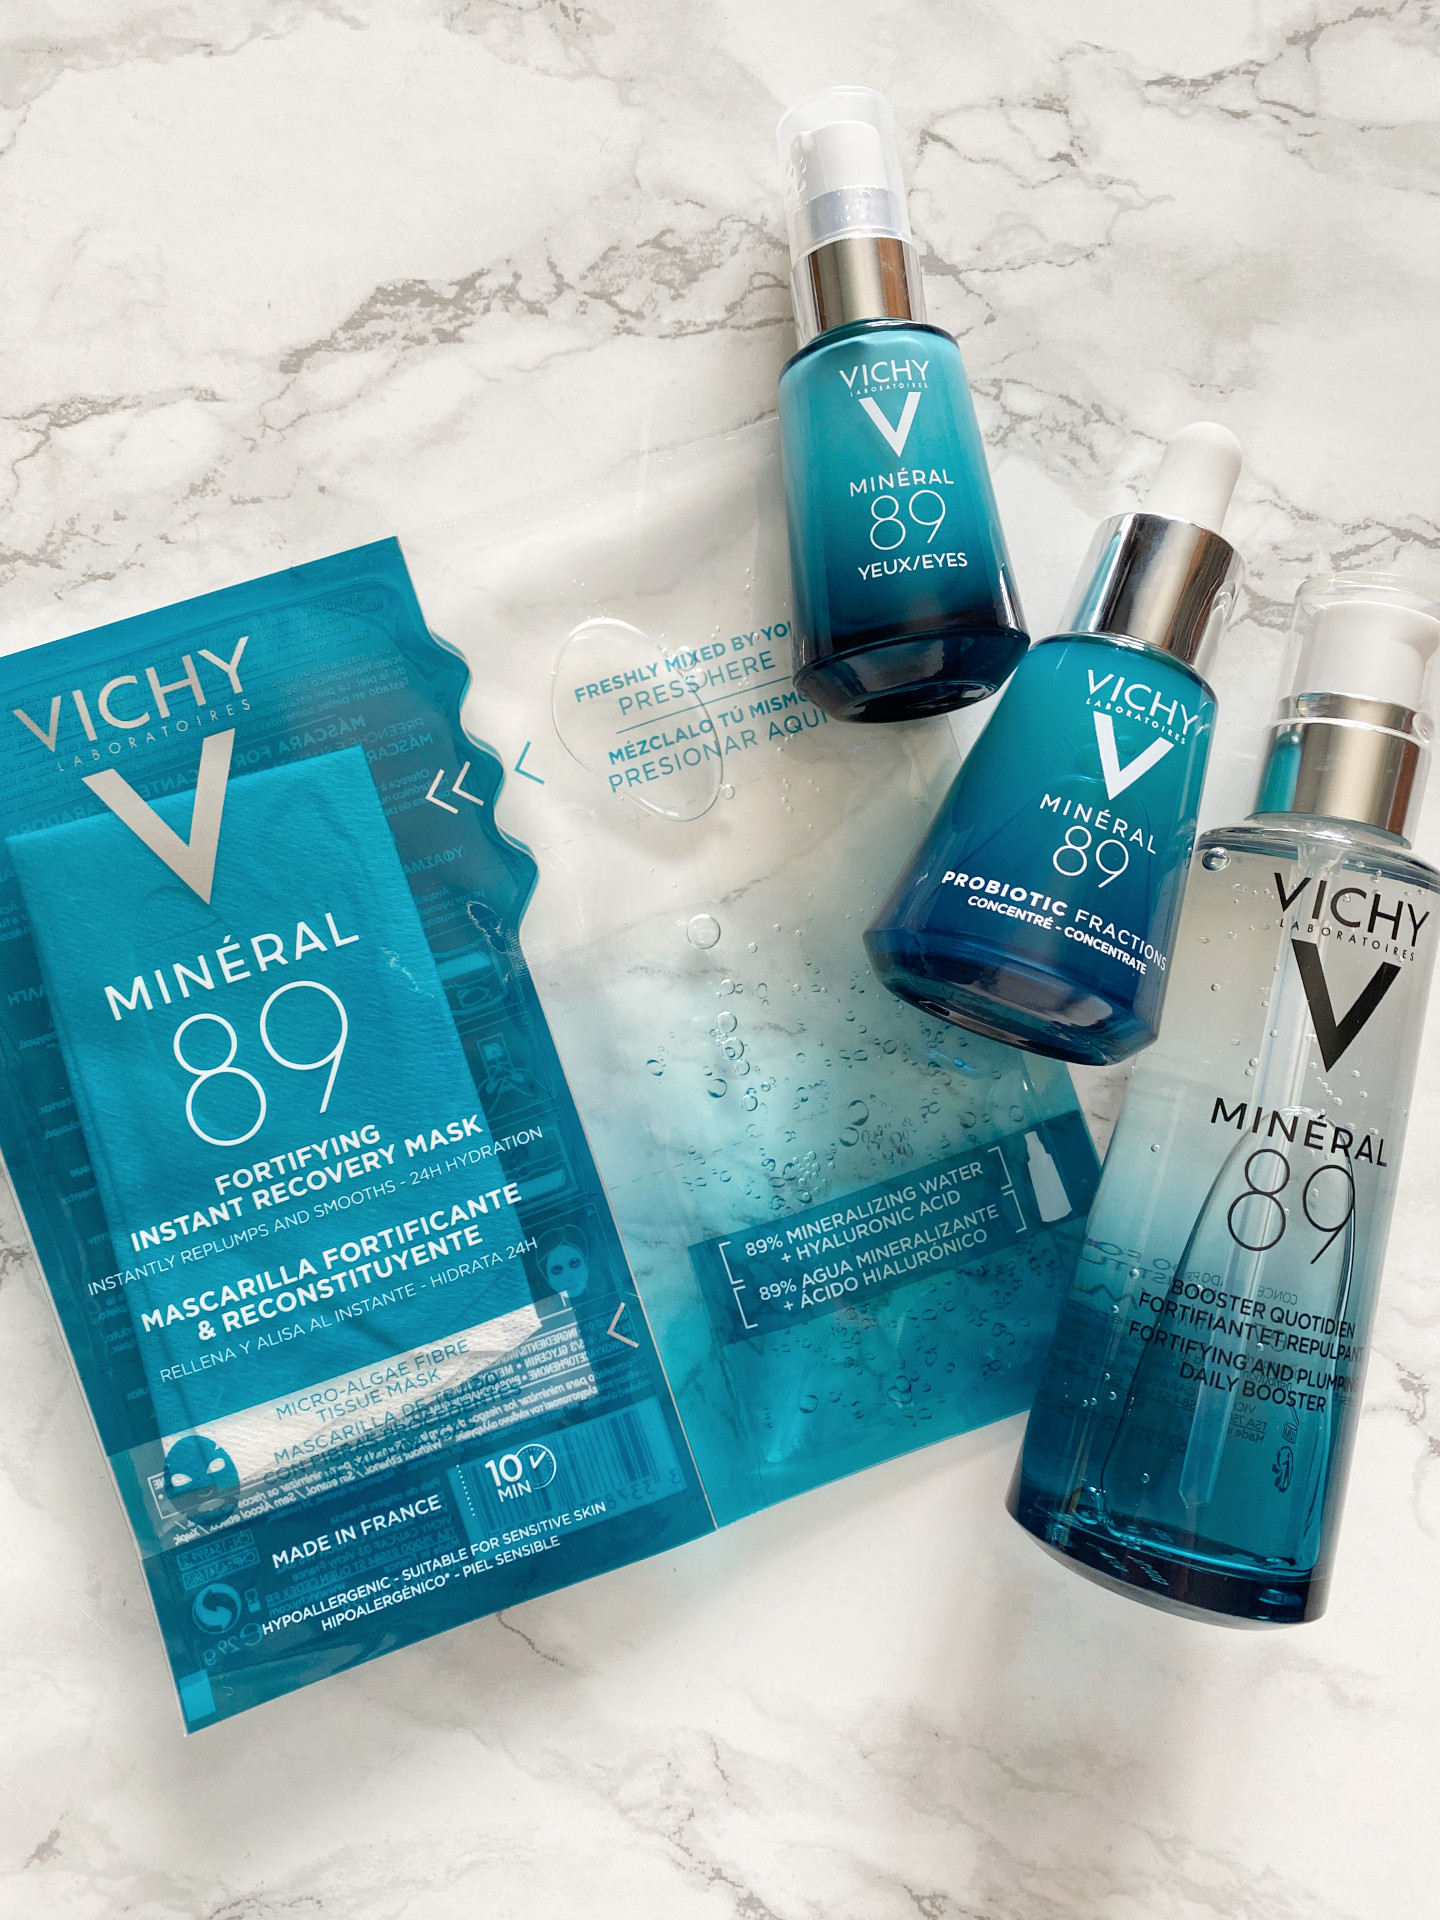 vichy mineral 89 skincare review